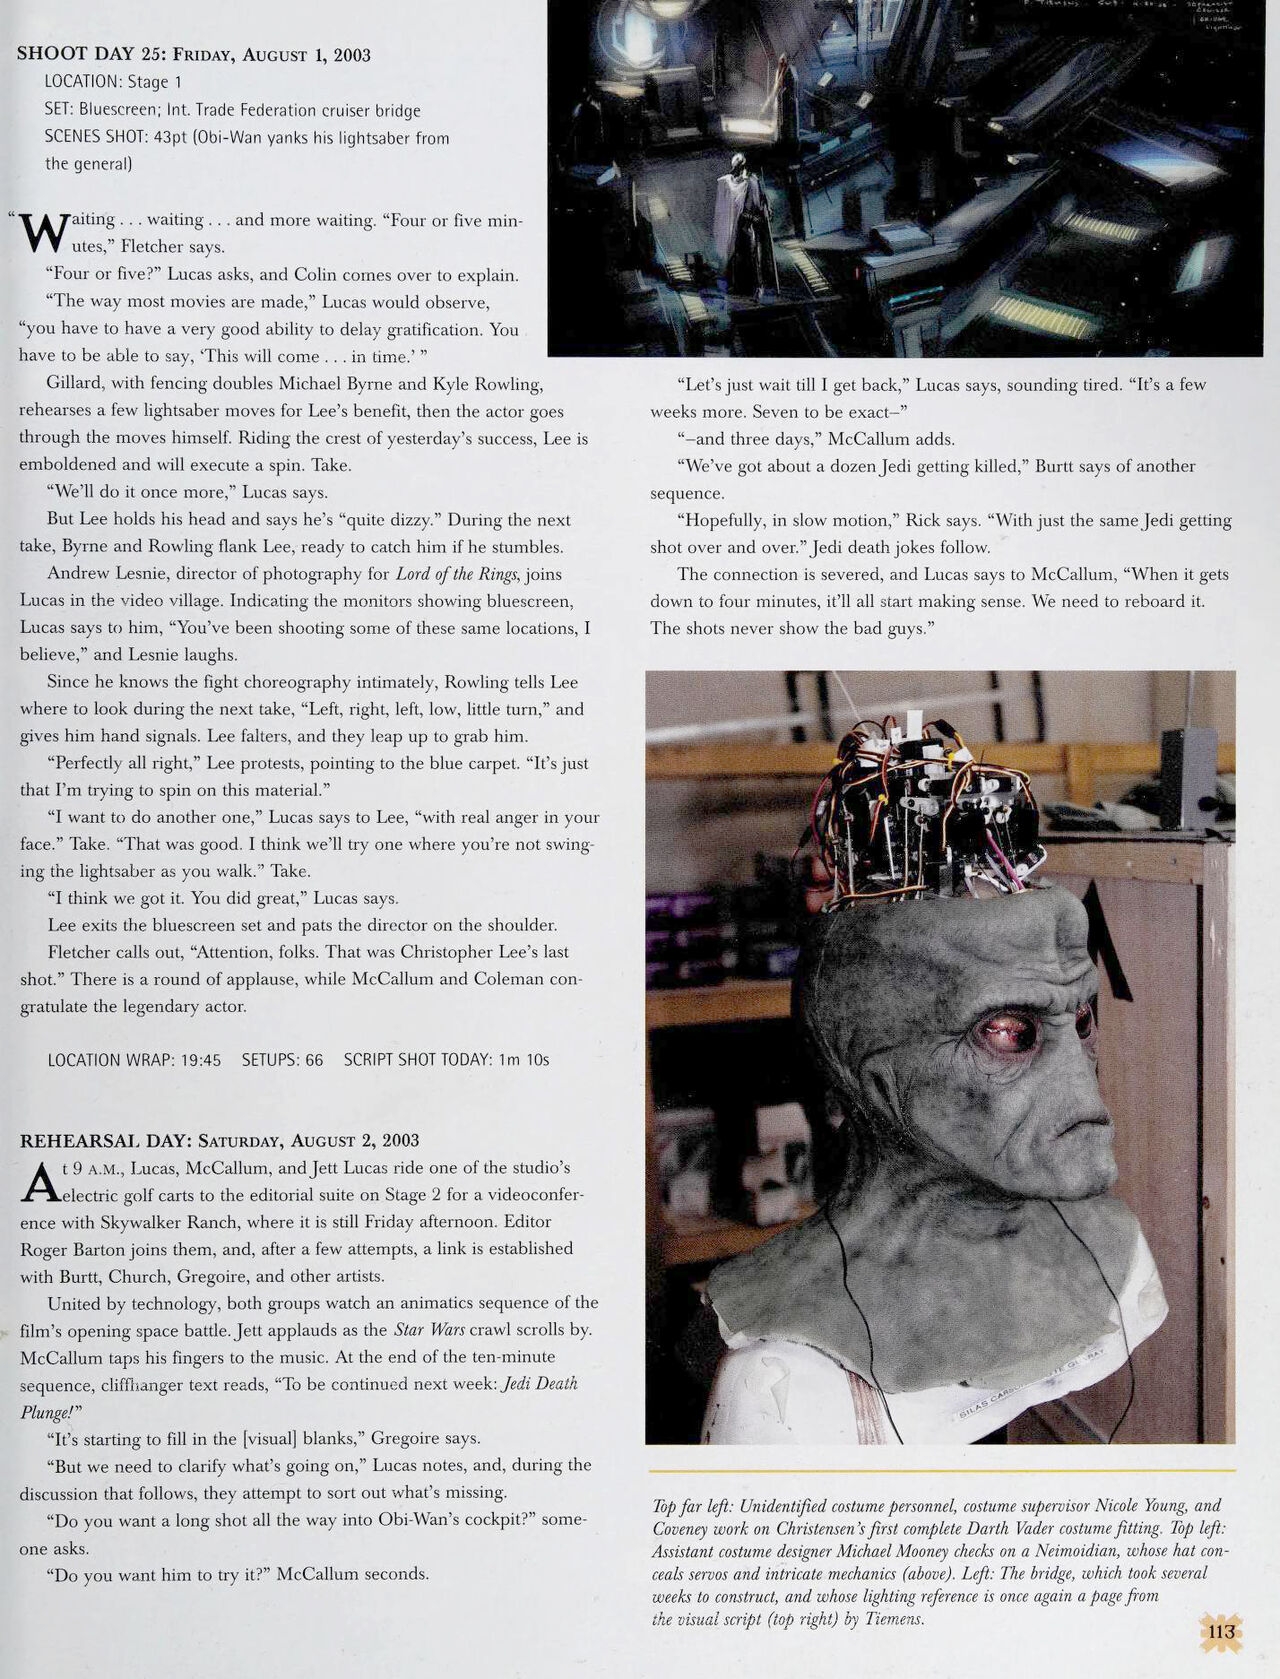 The Making of Star Wars: Revenge of the Sith 114